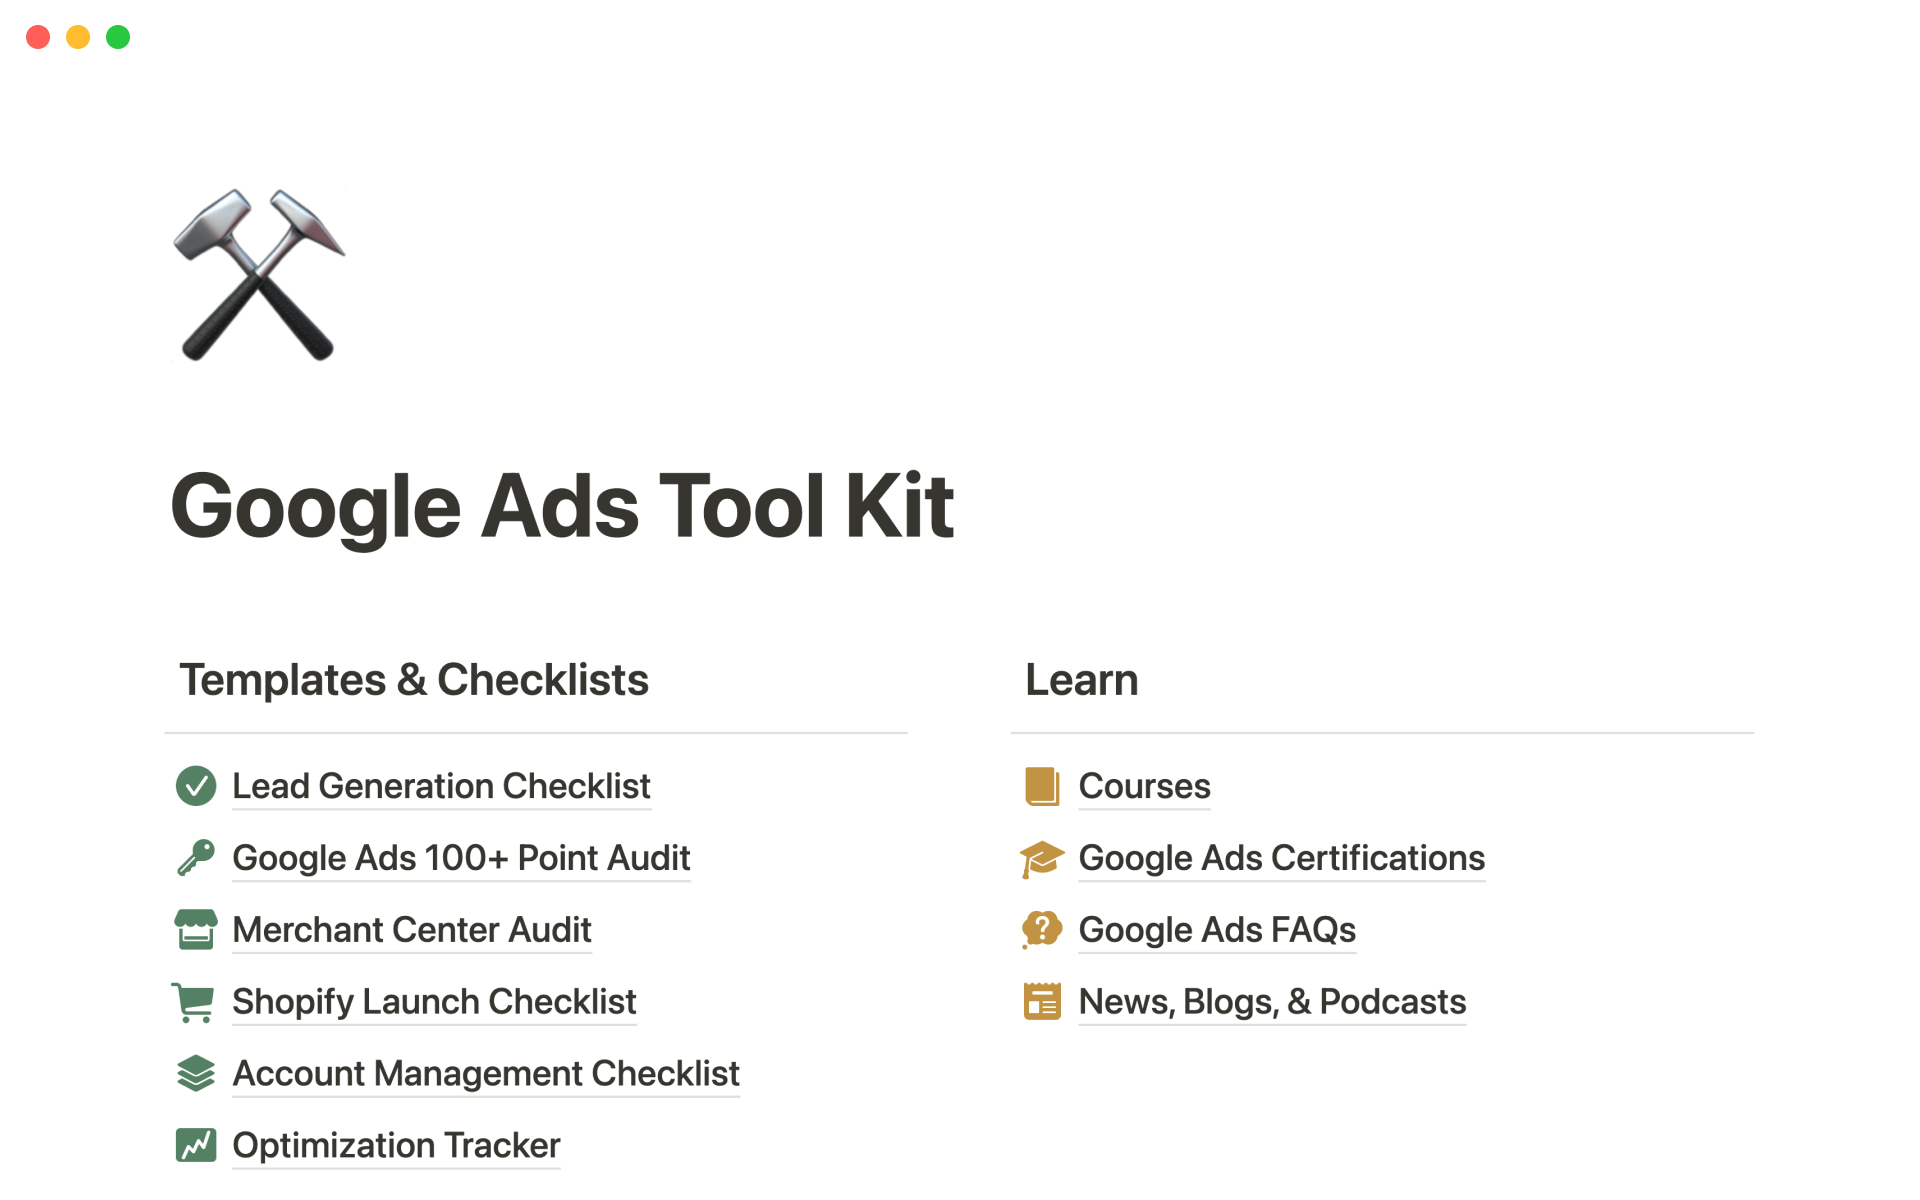 Helps people manage and grow their Google Ads account.